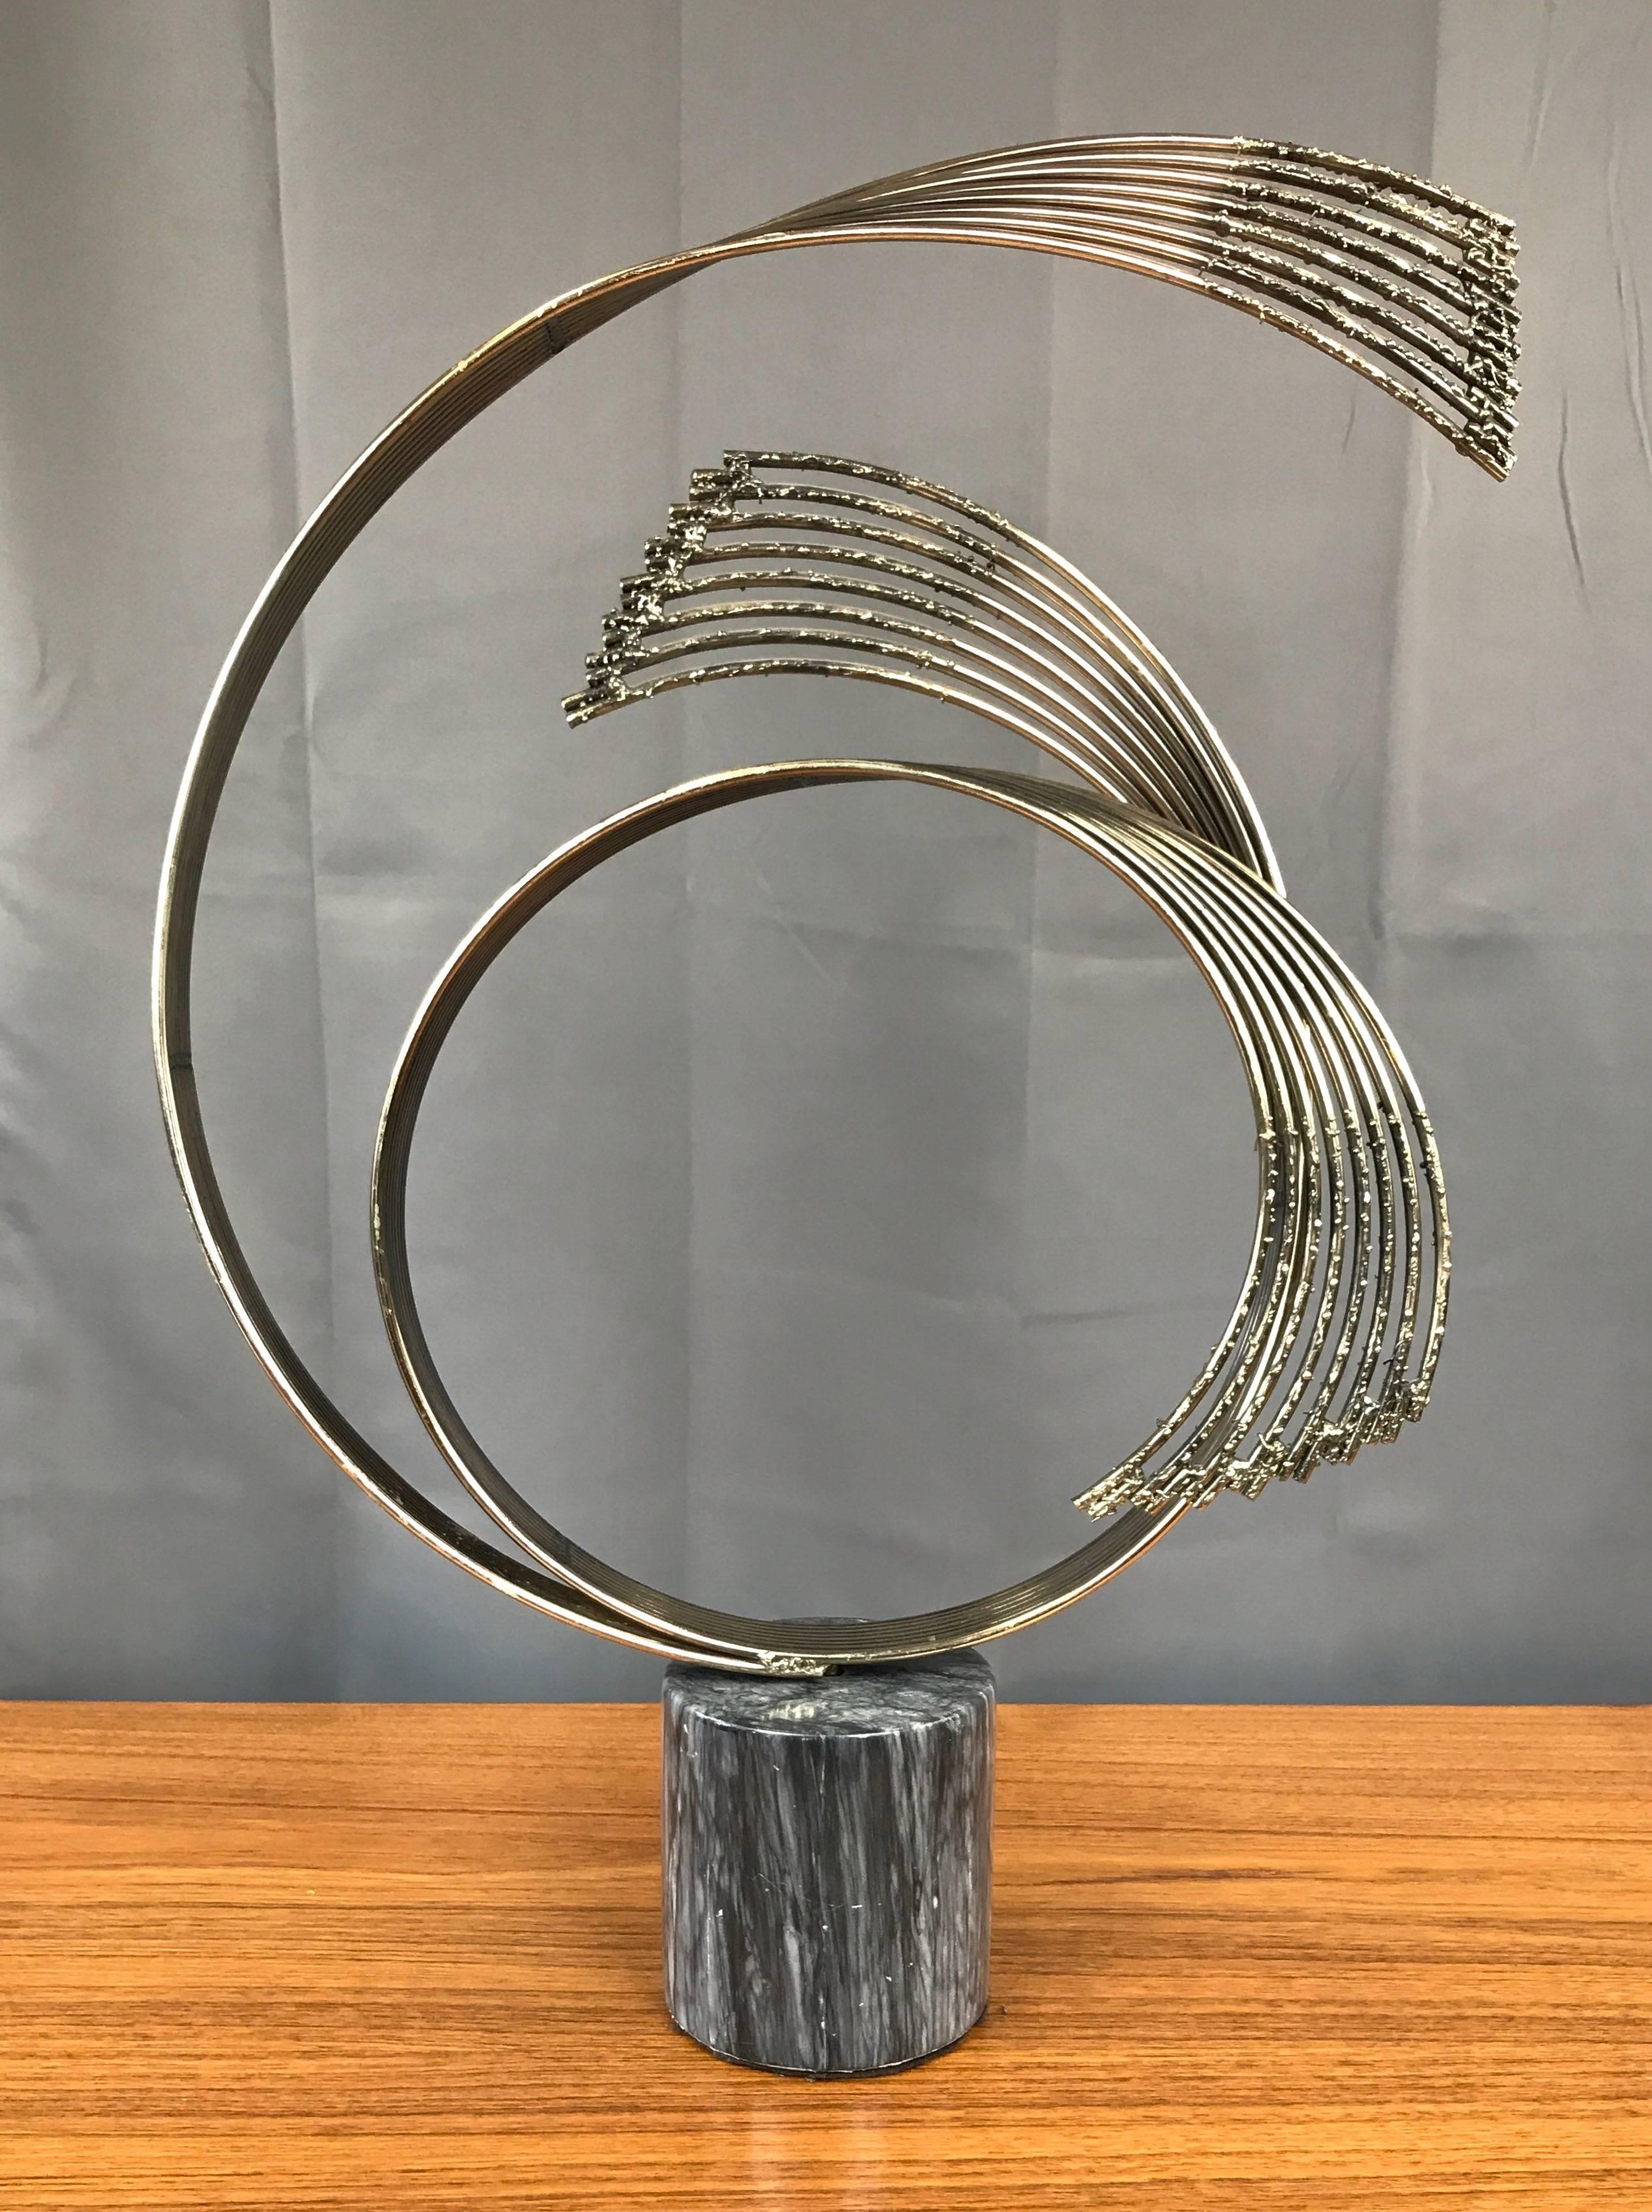 A large and dramatic signed brass sculpture on marble pedestal titled “Windswept” by Curtis Jeré.

Three looping sets of eight welded brass rods transition from smooth, tightly grouped ribbons to gracefully spreading, Brutalist-style ends.